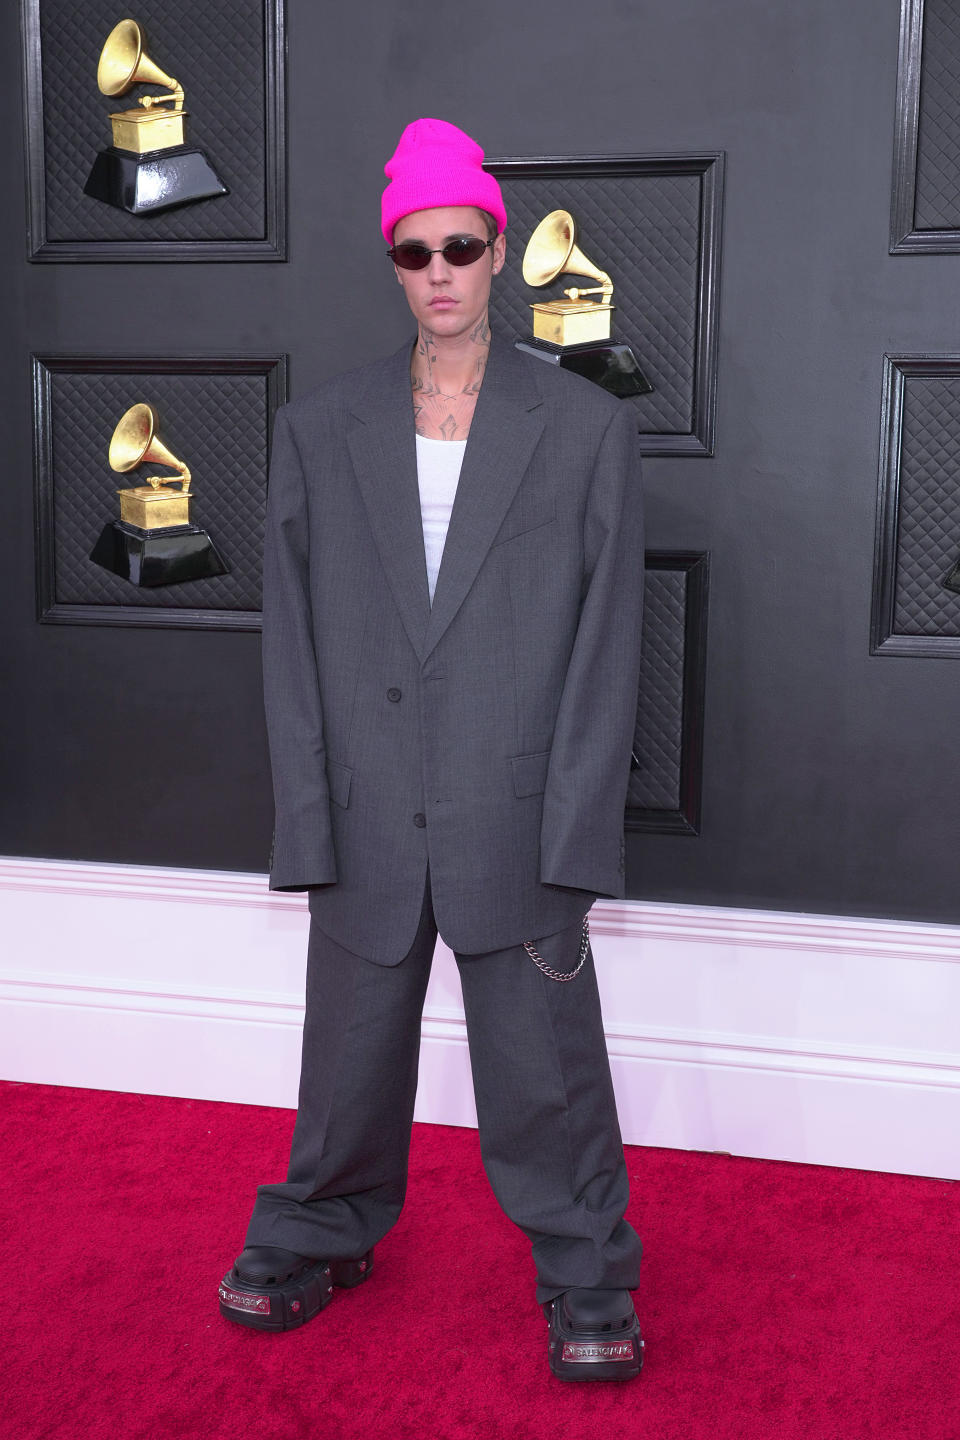 Justin Bieber on the red carpet in an oversized gray suit, white shirt, pink beanie, and sunglasses at the Grammys